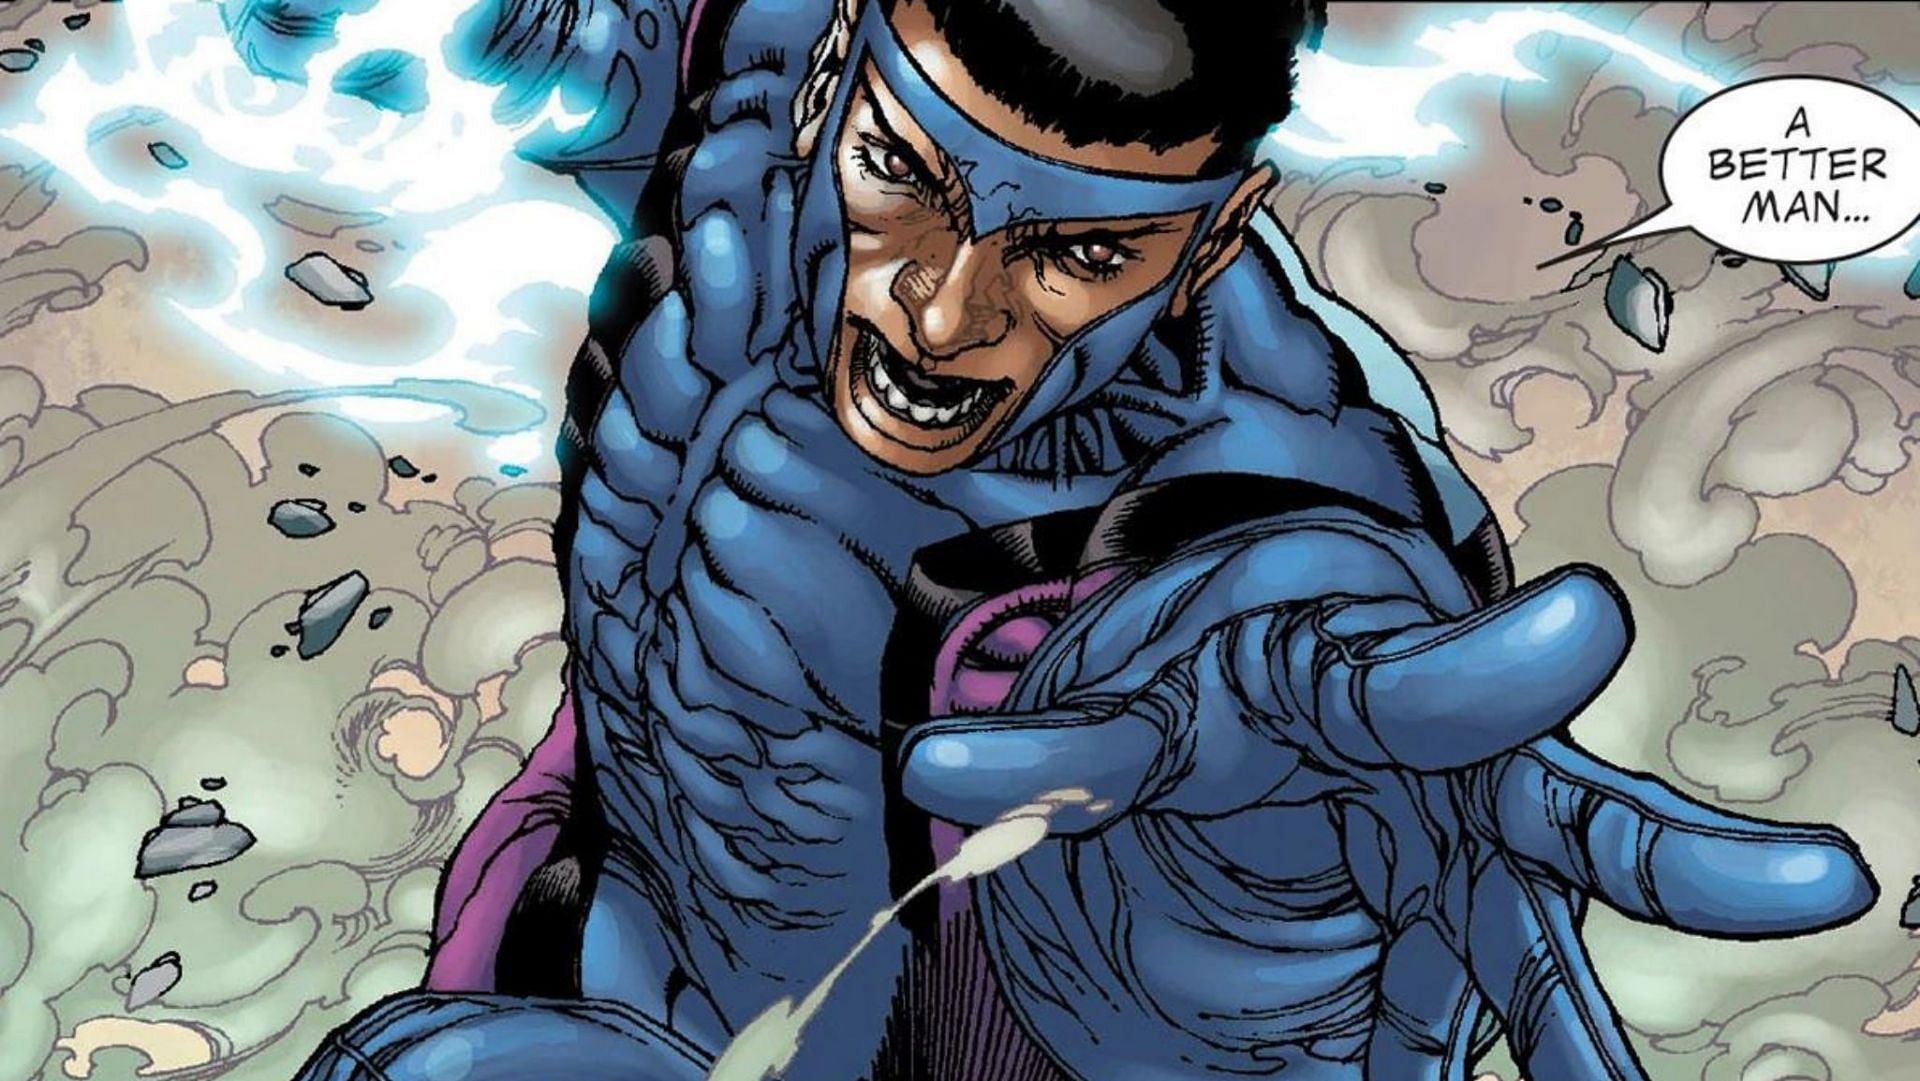 A lesser-known character with an unusual power set involving holograms, but lacks the popularity and recognition to make it into the MCU (Image via Marvel Comics)